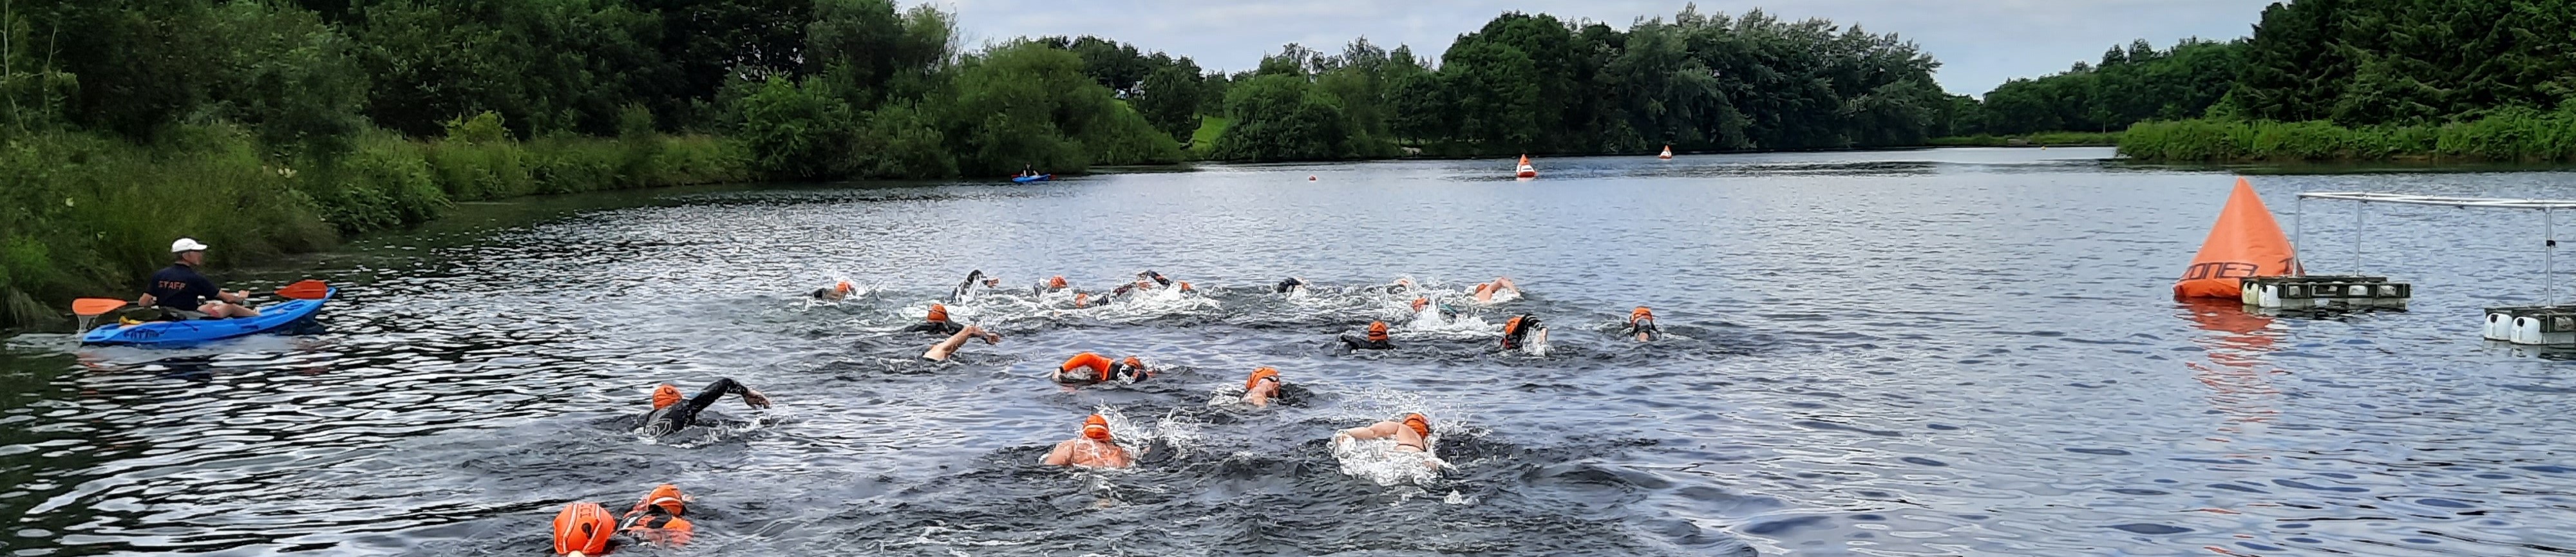 Army Swimming Union Individual Open Water Swimming Series Event 2 – 14 Jul 21 – RESULTS